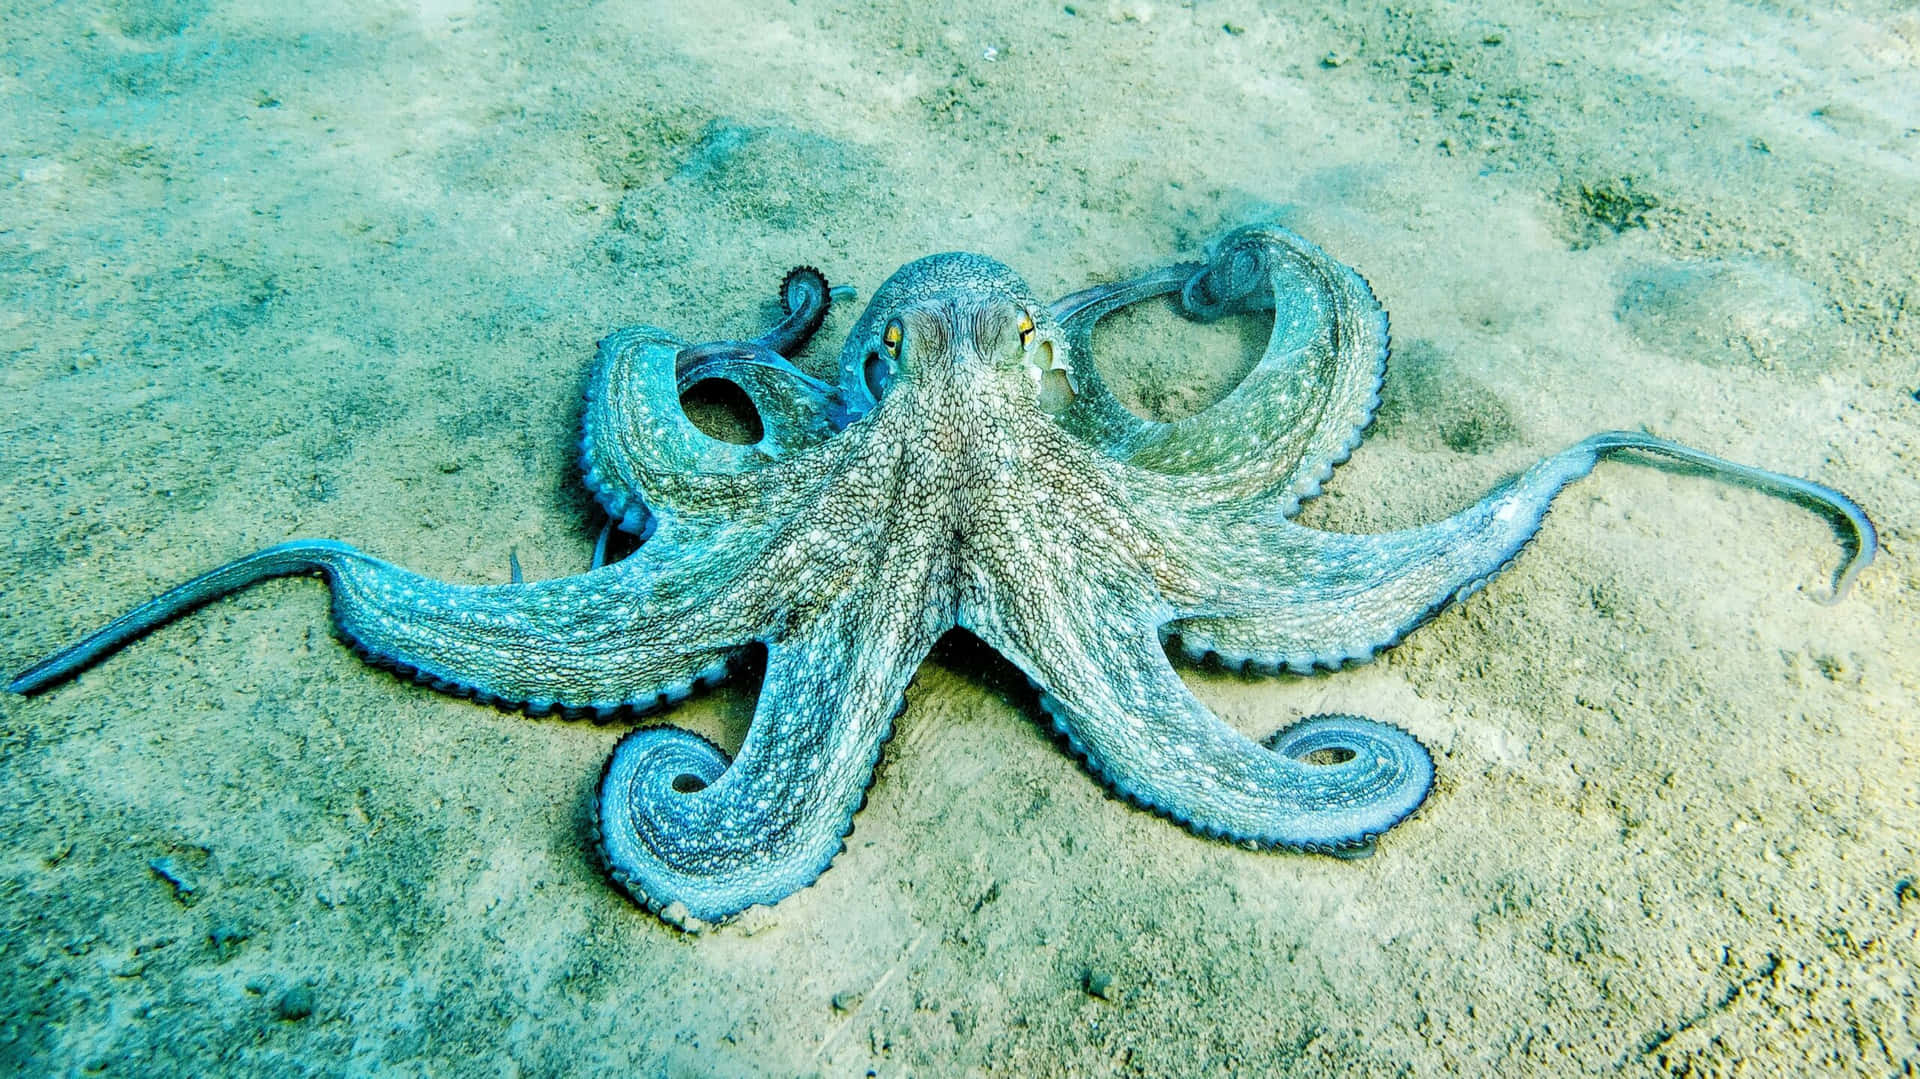 Octopus Sandy Seabed Wallpaper